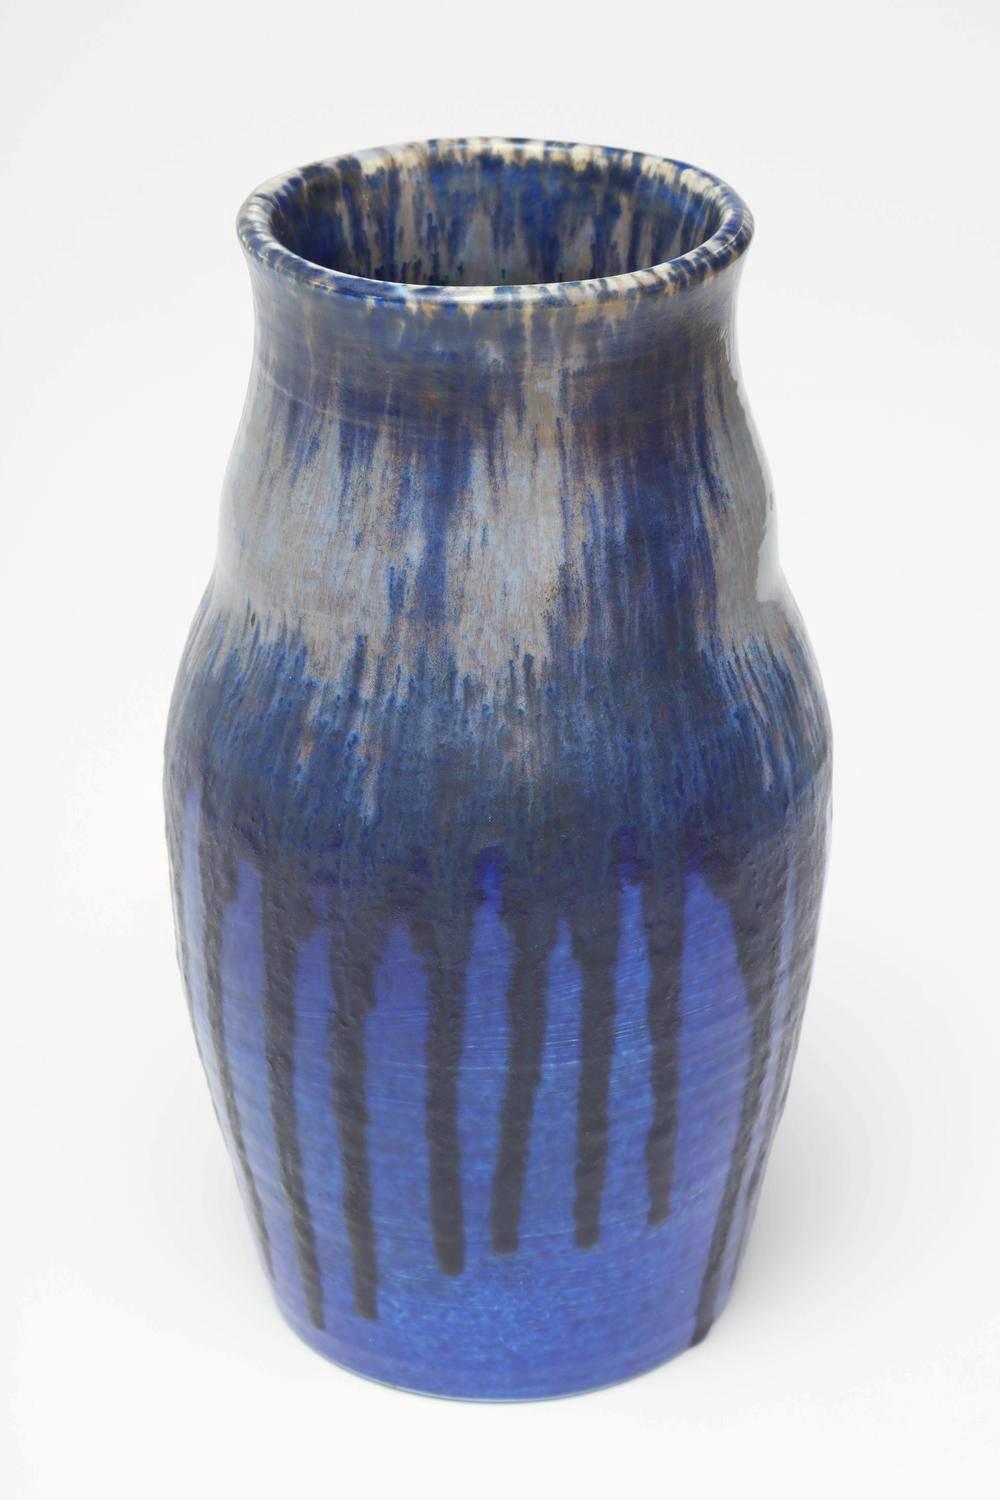 Ruskin Pottery Ceramic Vase, Glazed Stoneware, 1927 In Excellent Condition For Sale In New York, NY